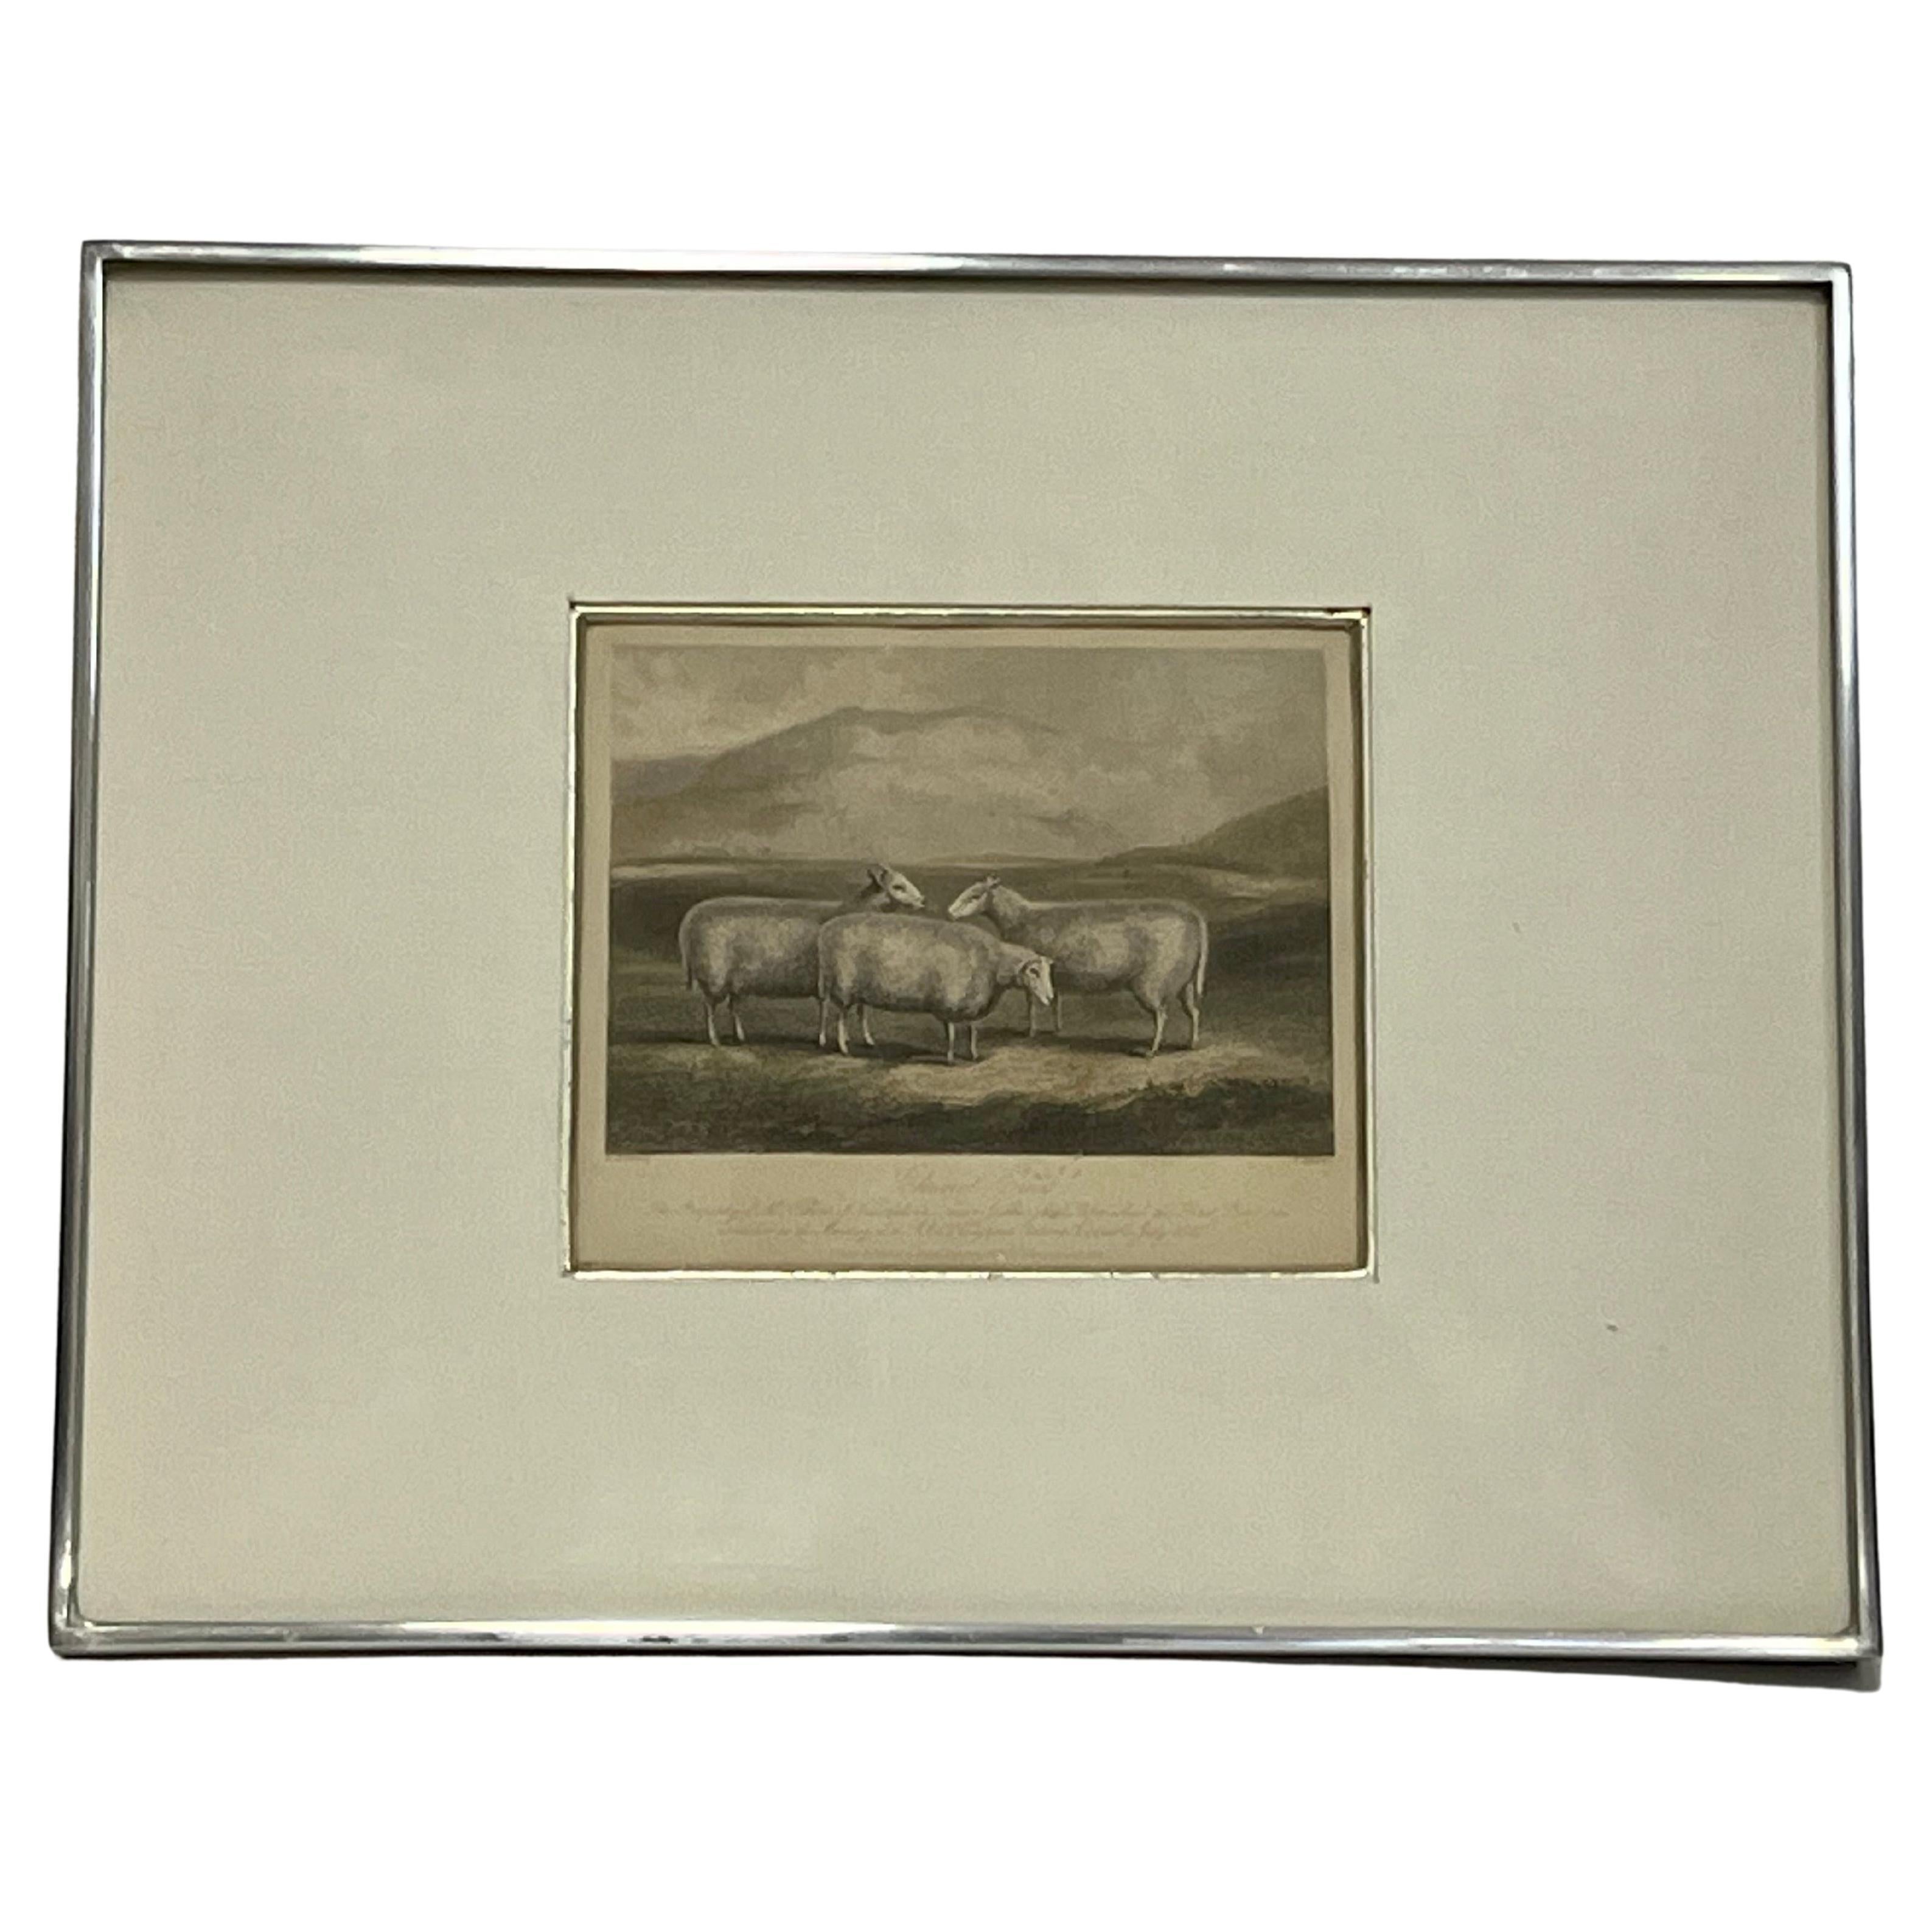 19th Century English Print by W. H. Davis of Cheviot Ewes in Kulicke Frame